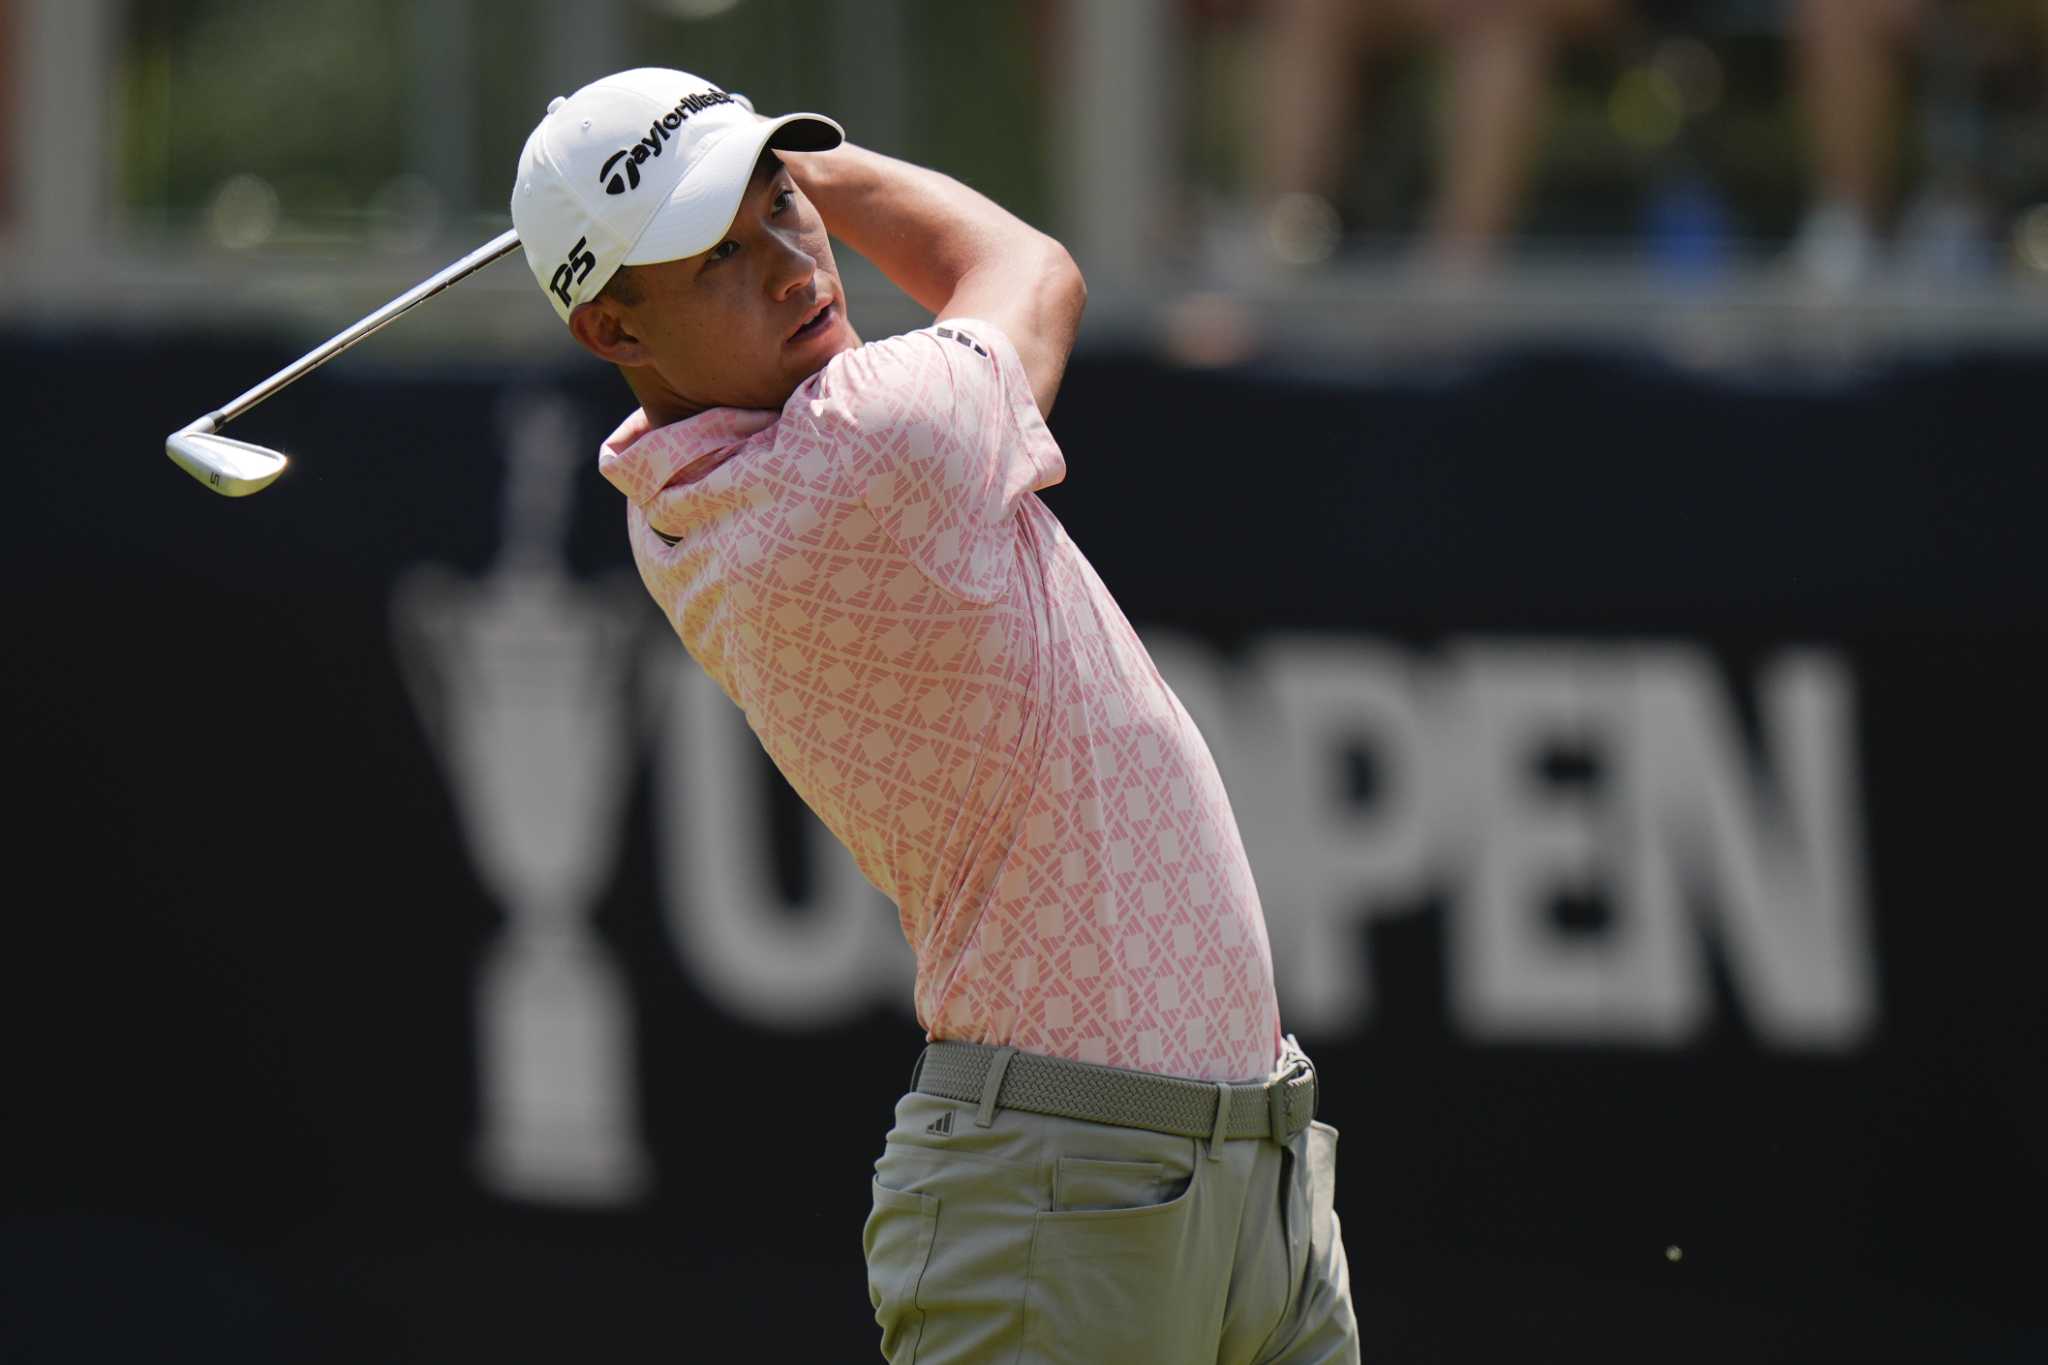 Collin Morikawa thought a 66 would give him a shot at the US Open. Then came Bryson DeChambeau